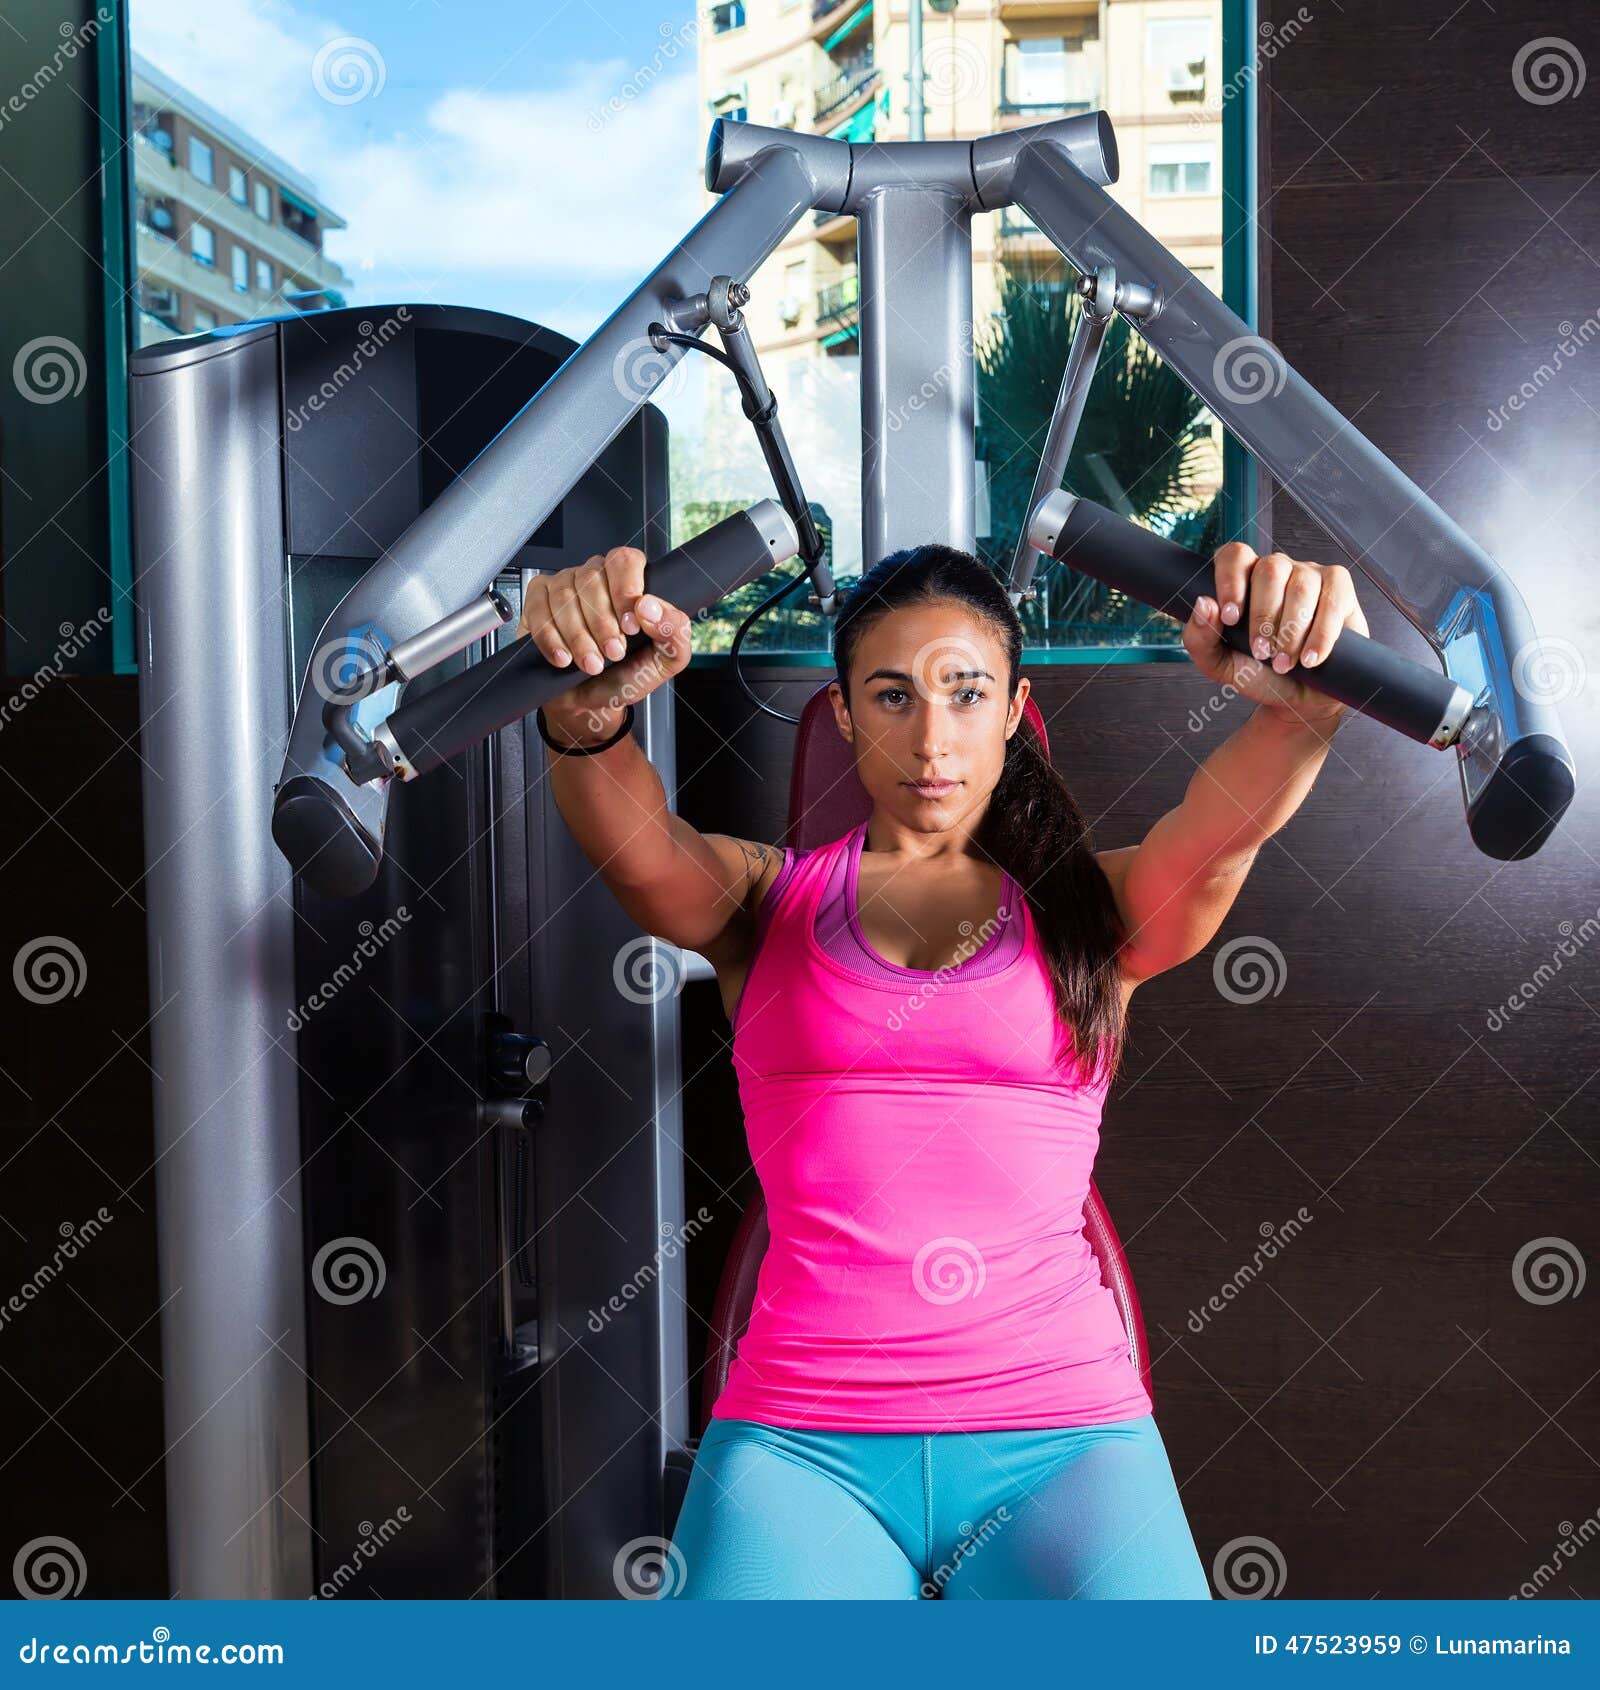 Brunette Woman Seated Chest Press Machine Gym Stock Image - Image of  brunette, club: 47523959